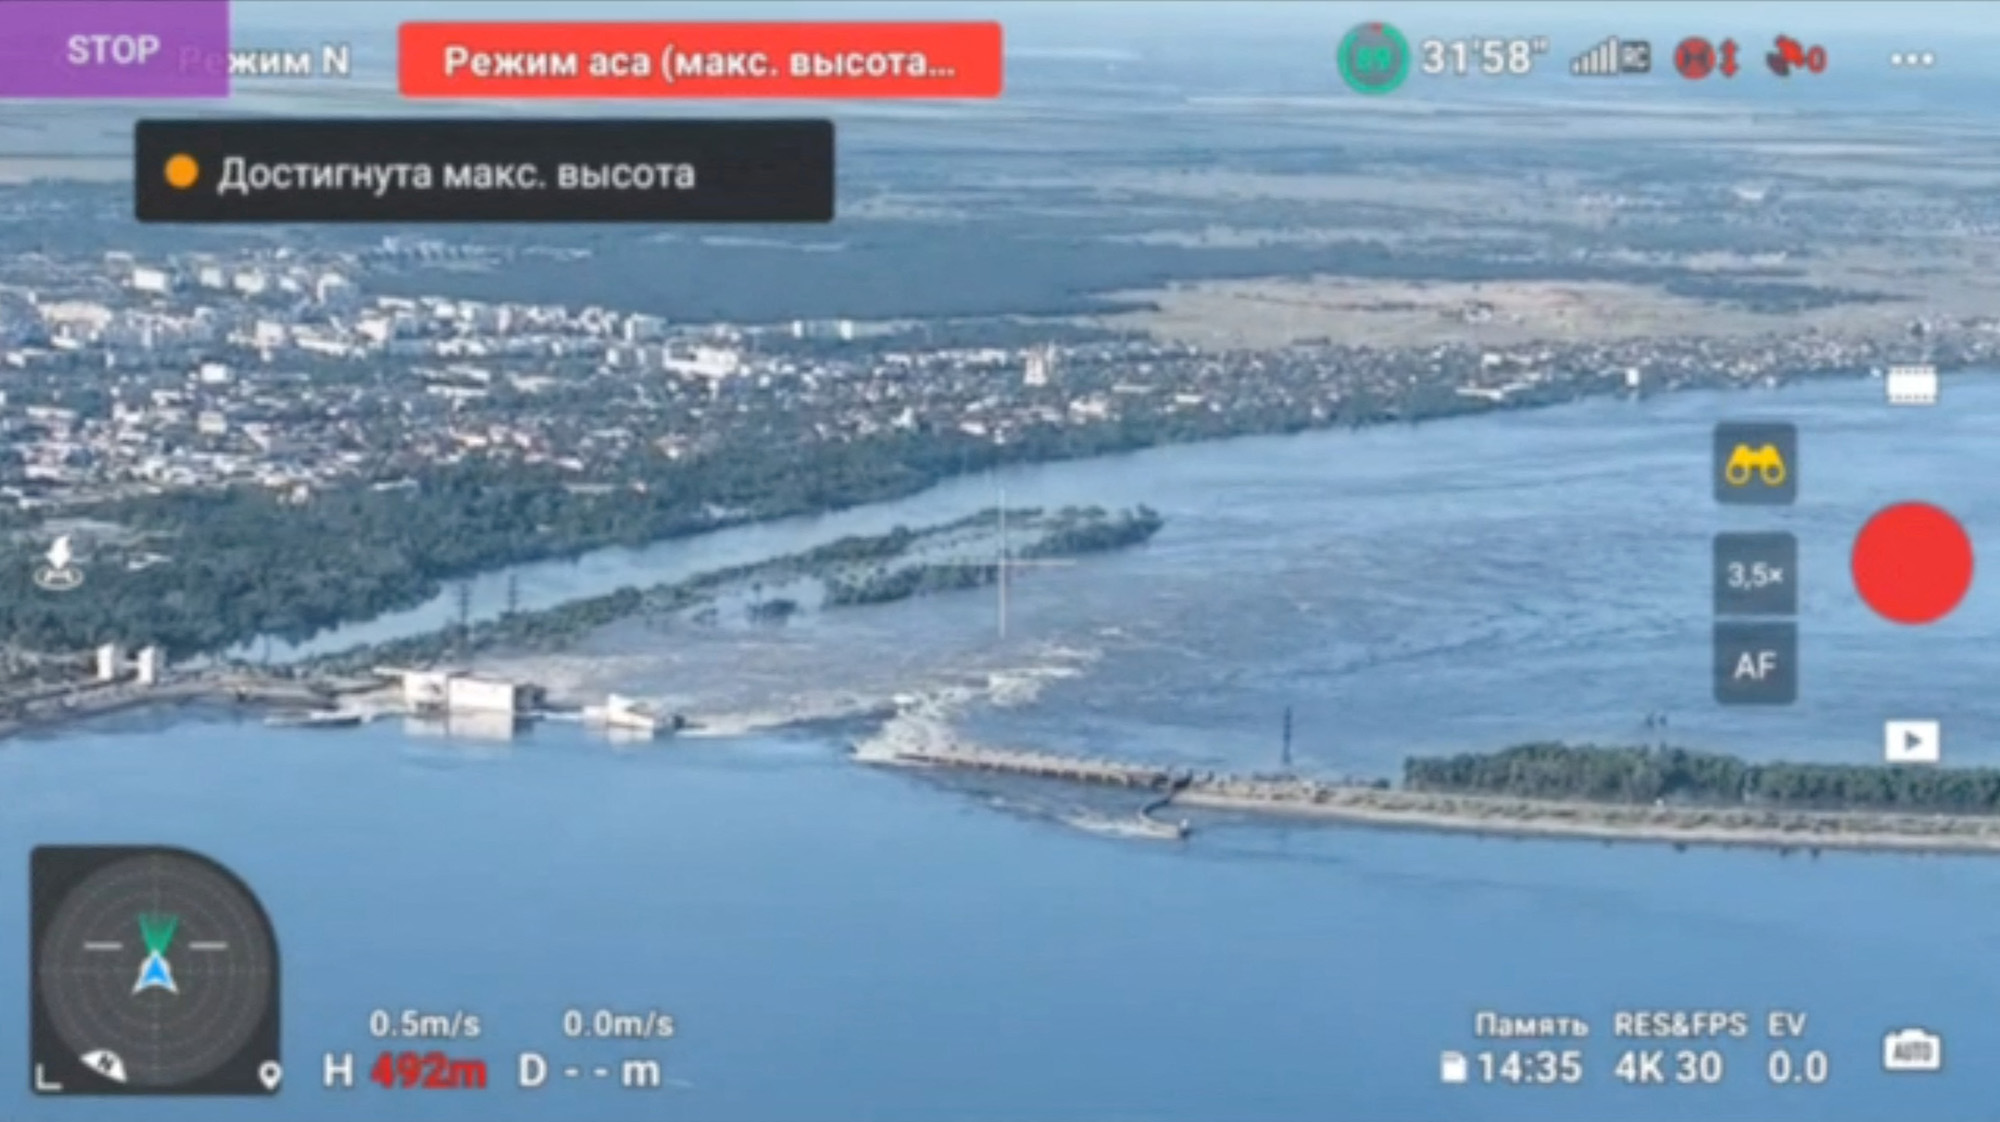 A view of the Nova Kakhovka dam that was breached in Kherson region, Ukraine, on June 6, in this screen grab taken from a video.